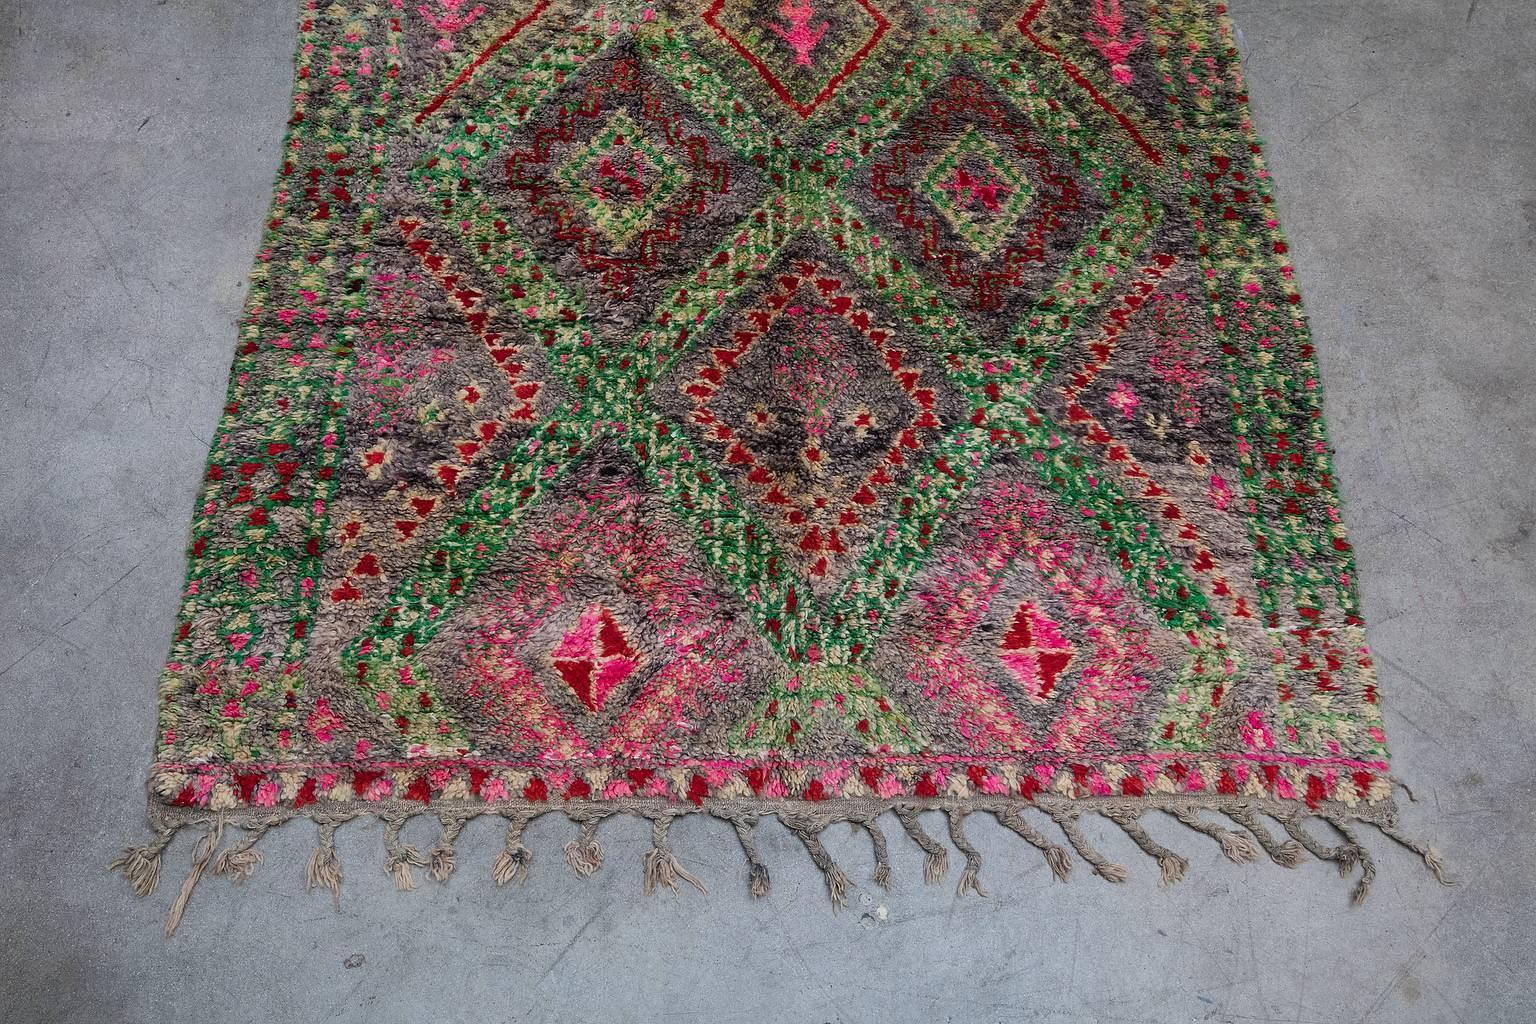 Ait Seghrouchène, dated to circa 1980. tribe yields from the Middle Atlas region of Morocco. Their rugs tend to be very plush, woven to provide warmth and comfort during the winter months.  Ait Seghrouchène rugs feature a well-known composition of